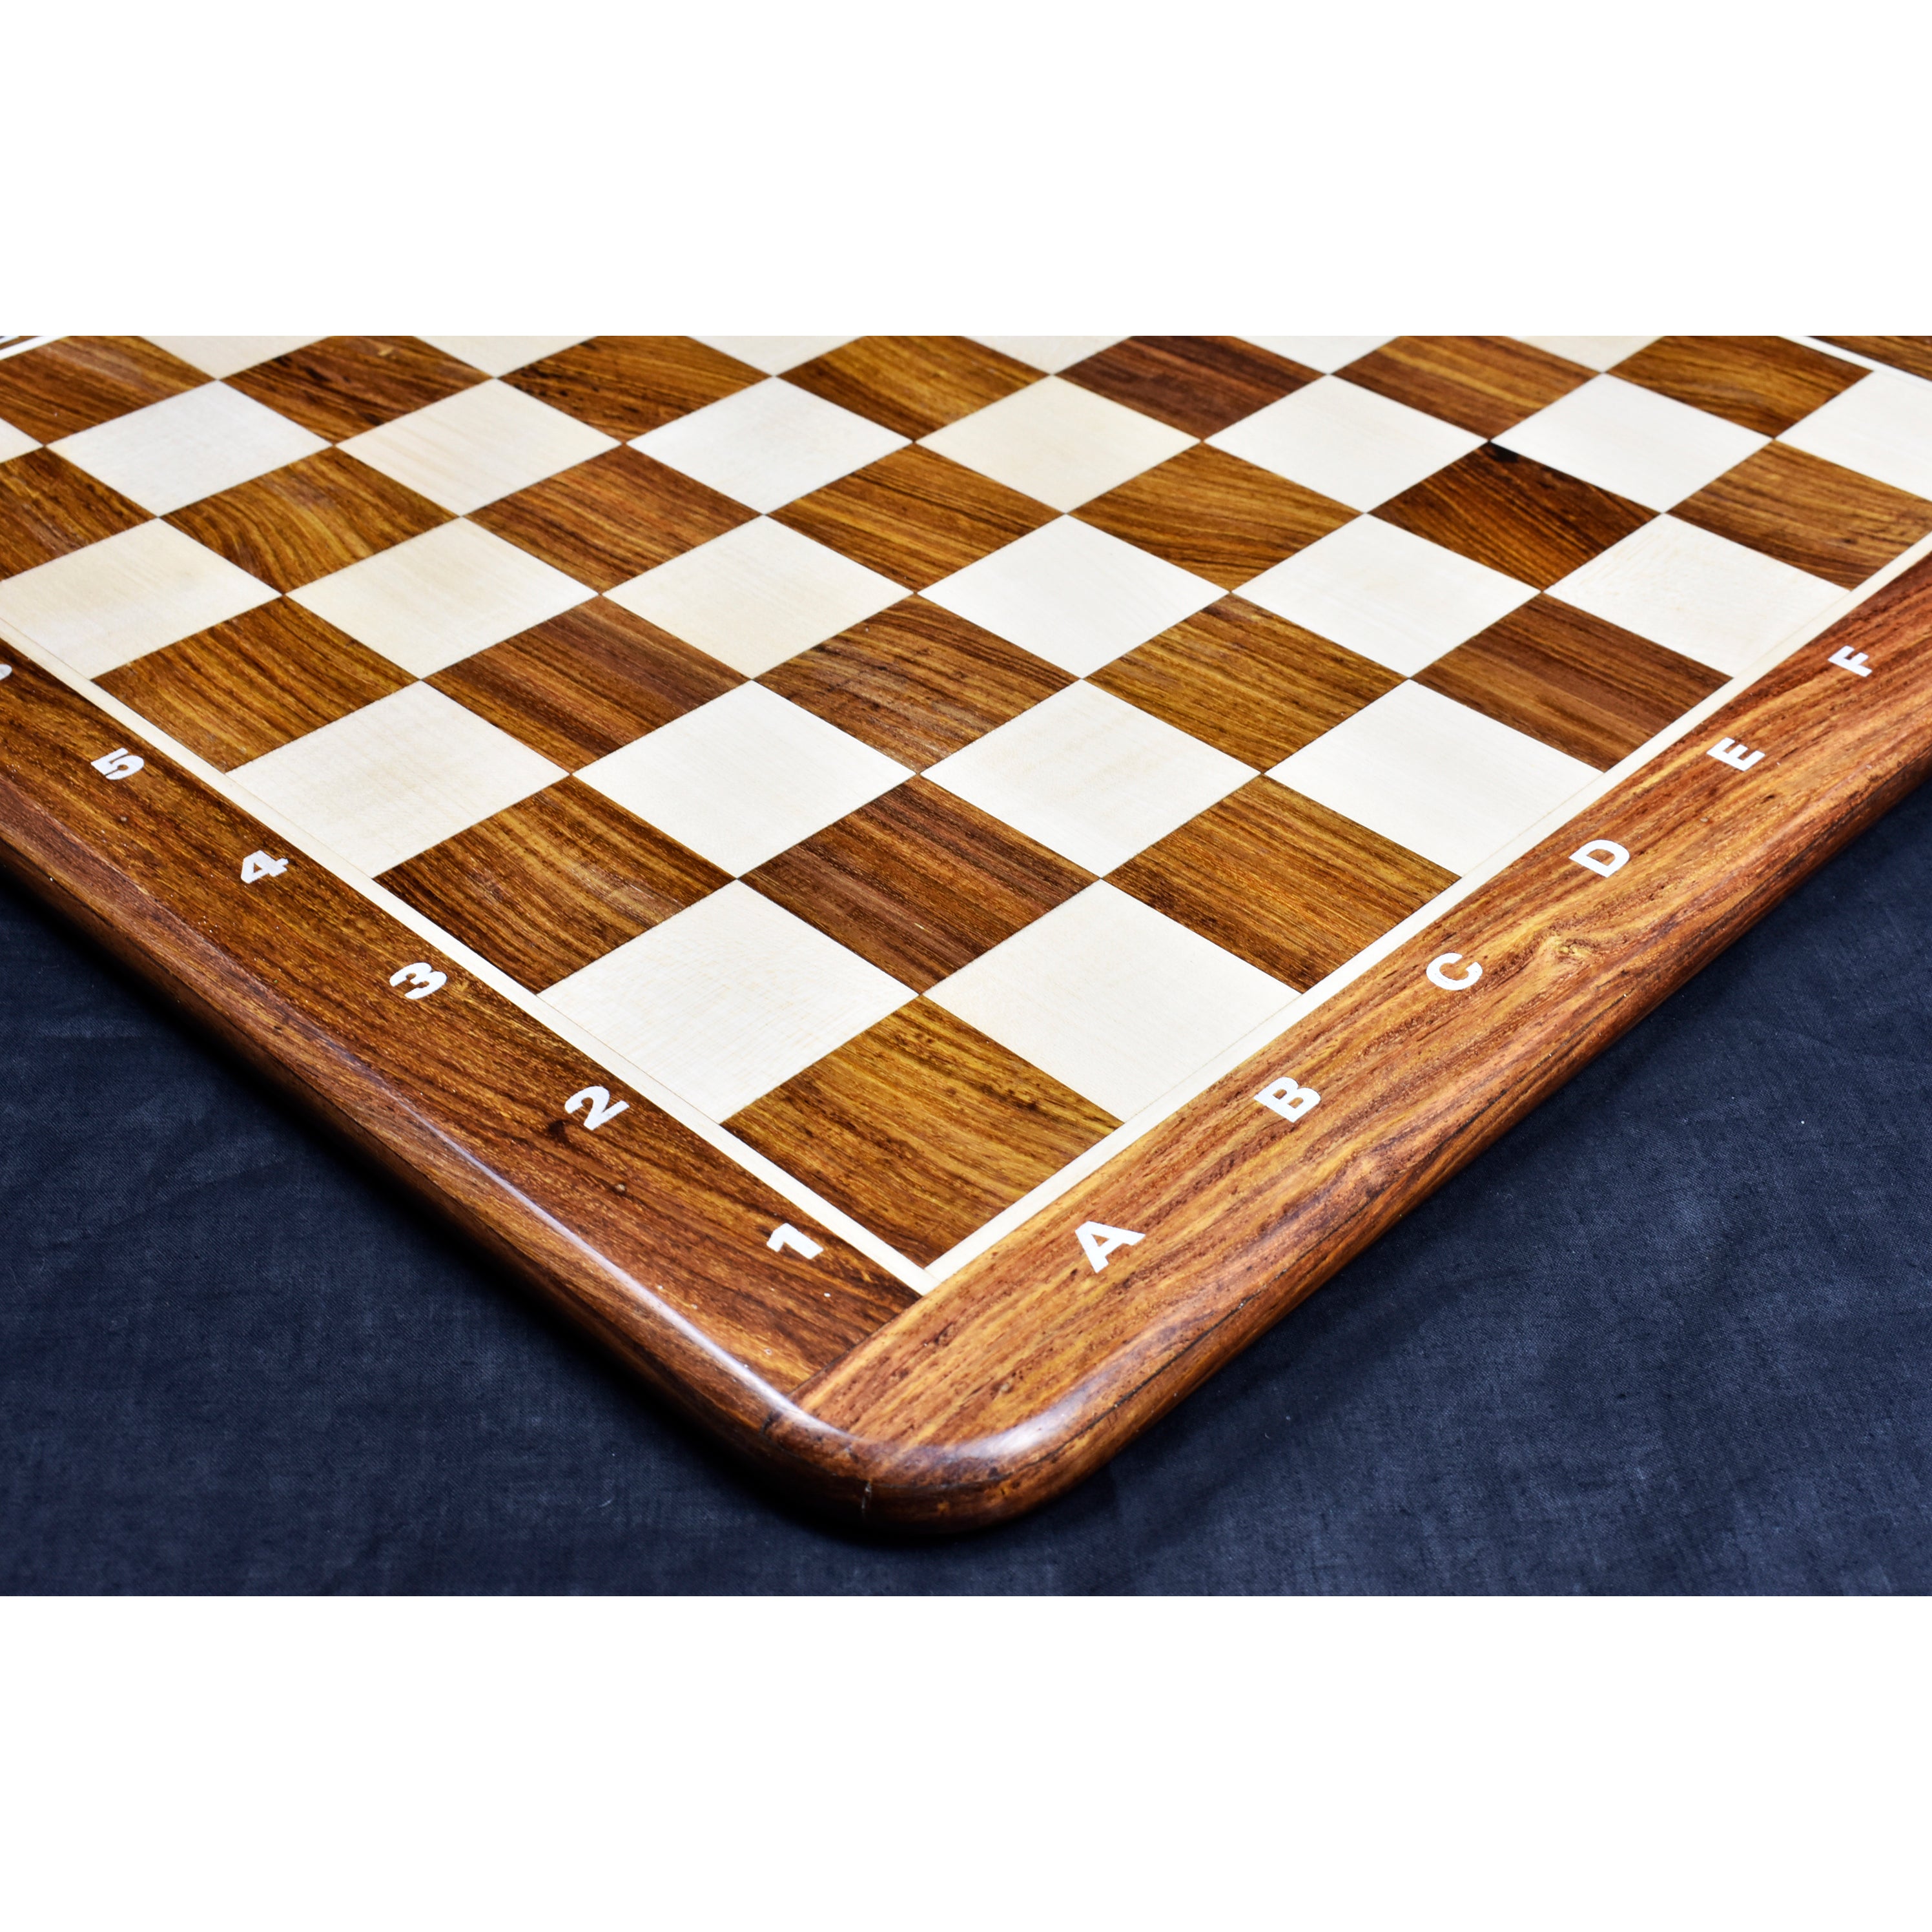 17" Inlaid Wood Chess Board -Golden Rosewood & Maple - Algebraic Notations